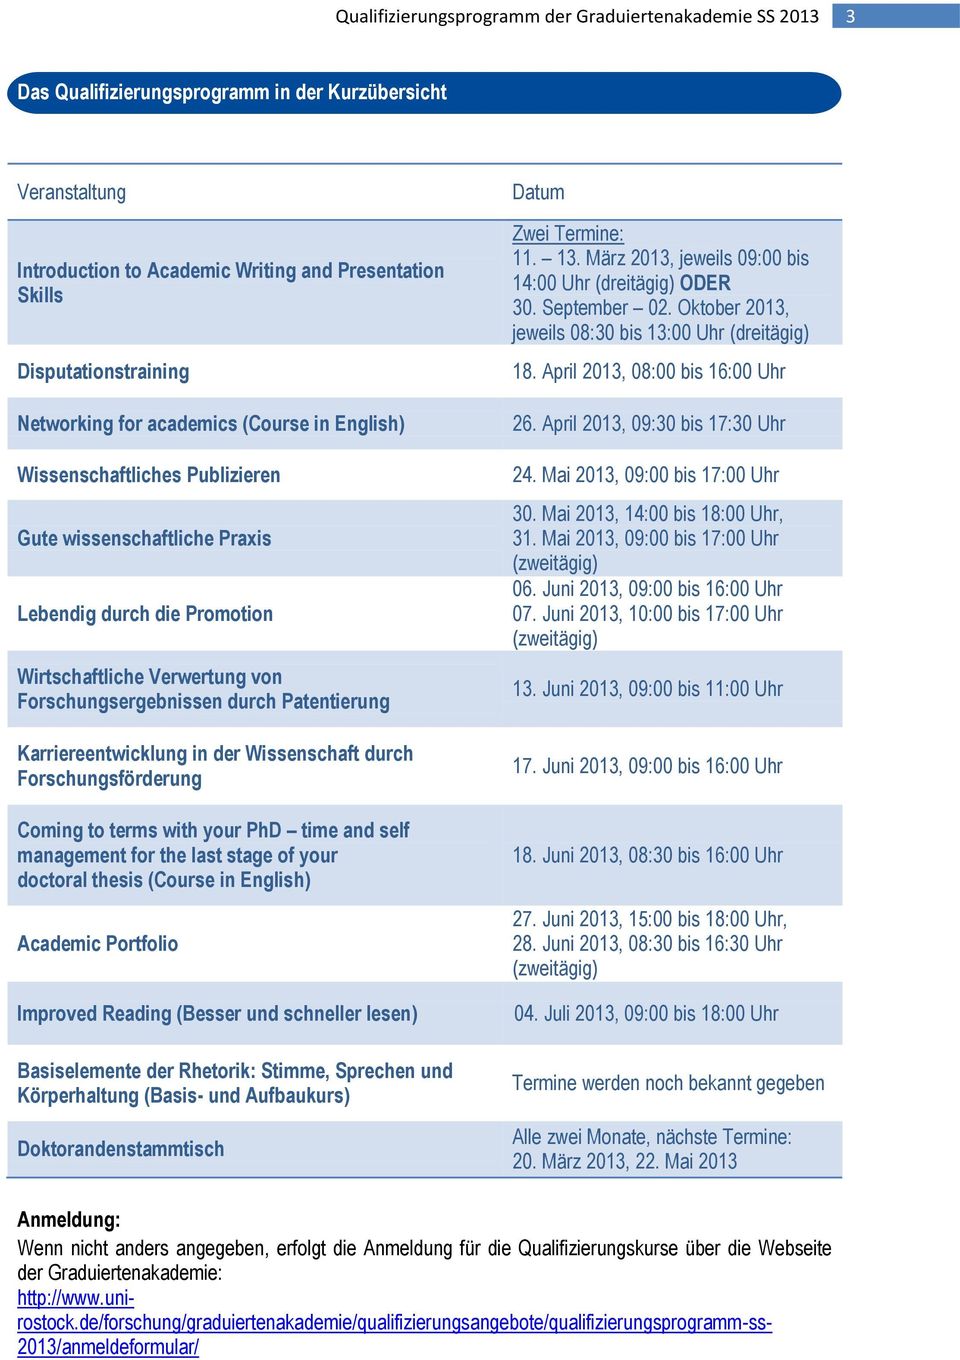 Wissenschaft durch Forschungsförderung Coming to terms with your PhD time and self management for the last stage of your doctoral thesis (Course in English) Academic Portfolio Improved Reading